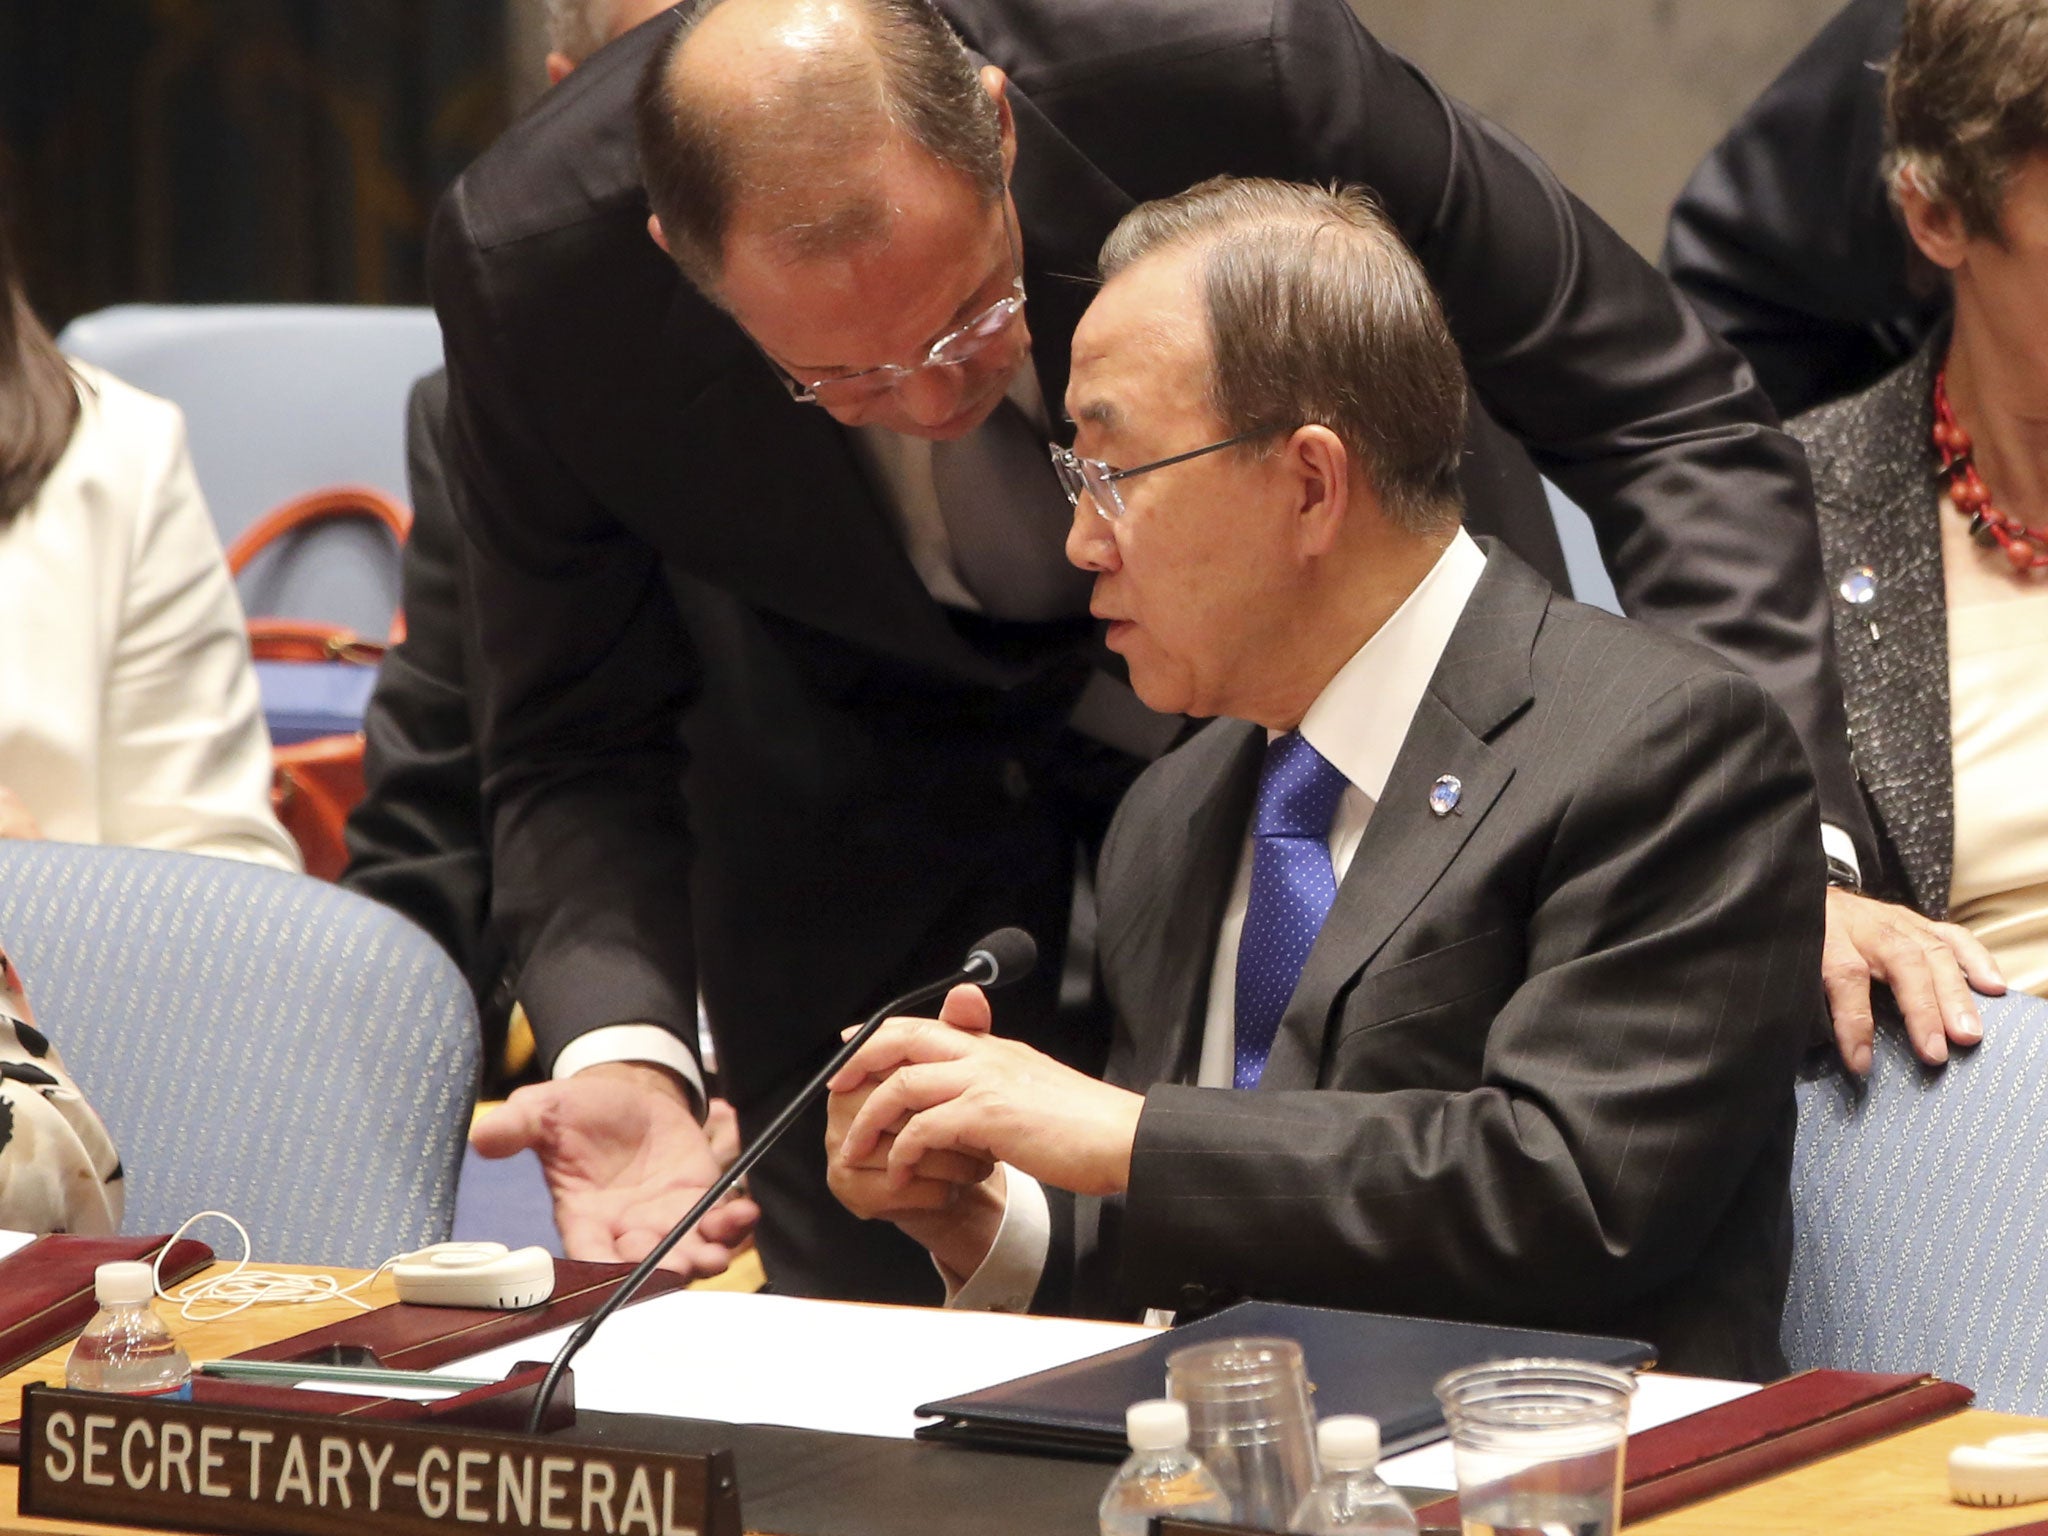 Russian Foreign Minister Sergey Lavrov speaks to United Nations Secretary-General Ban Ki-moon before the start of the Security Council meeting